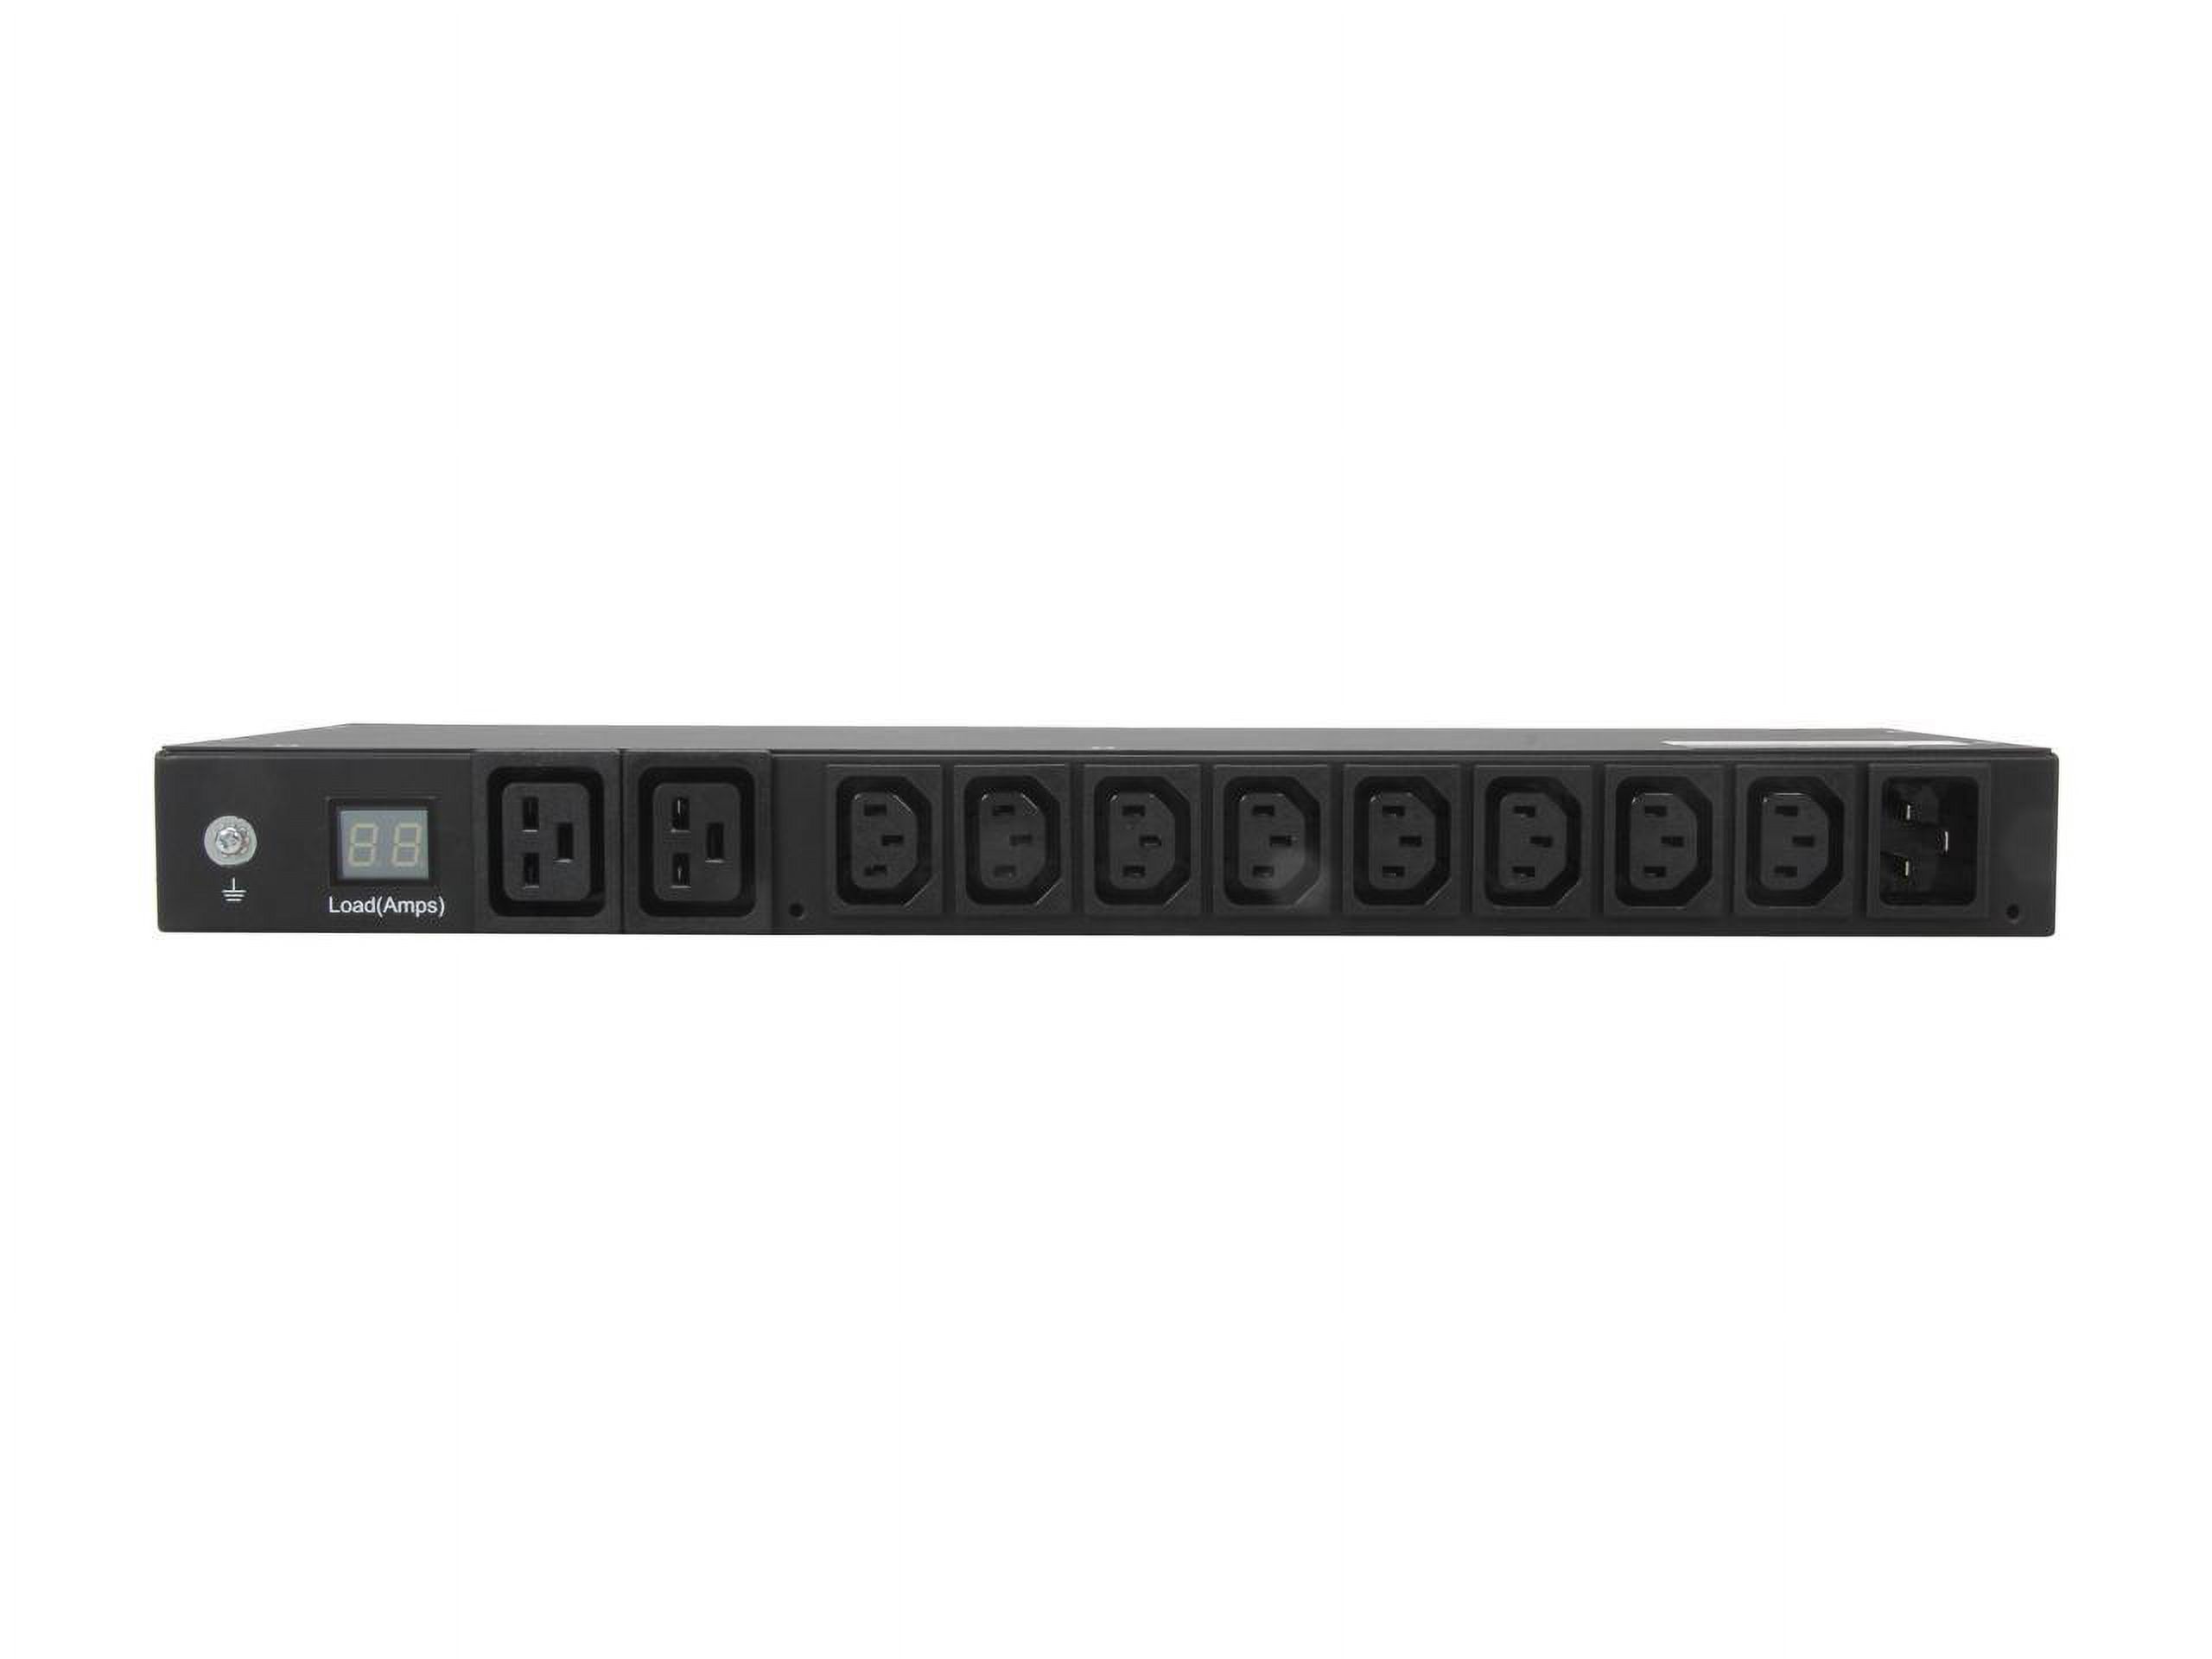 Tripp Lite Metered 10-Outlets PDU - image 2 of 4